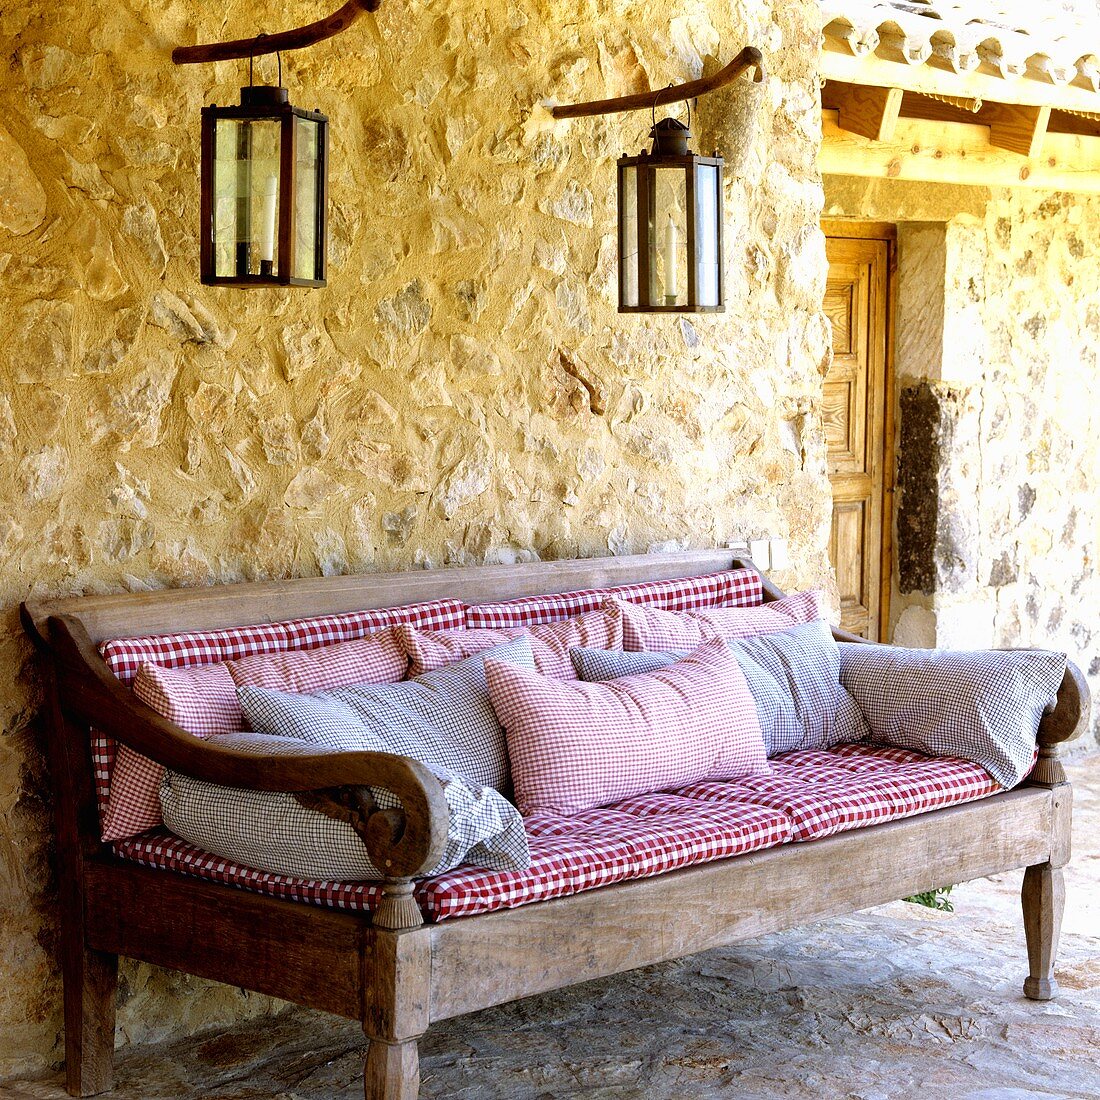 A Mediterranean country house - a rustic bench with checked upholstery and lanterns hanging on the exterior, natural stone walls